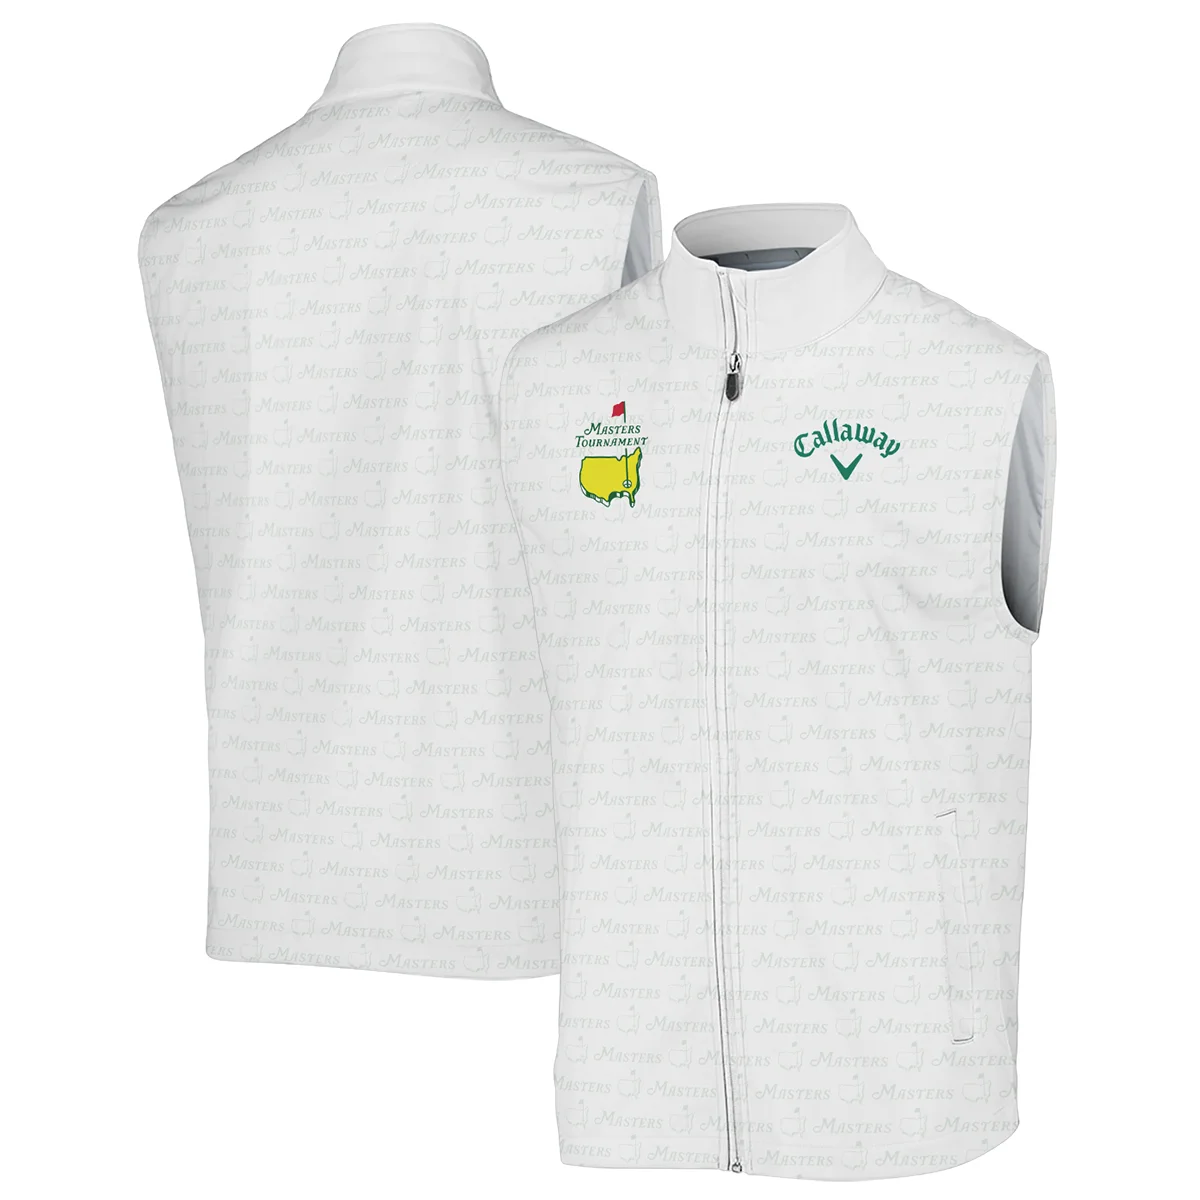 Golf Pattern Masters Tournament Callaway Long Polo Shirt White And Green Color Golf Sports All Over Print Long Polo Shirt For Men